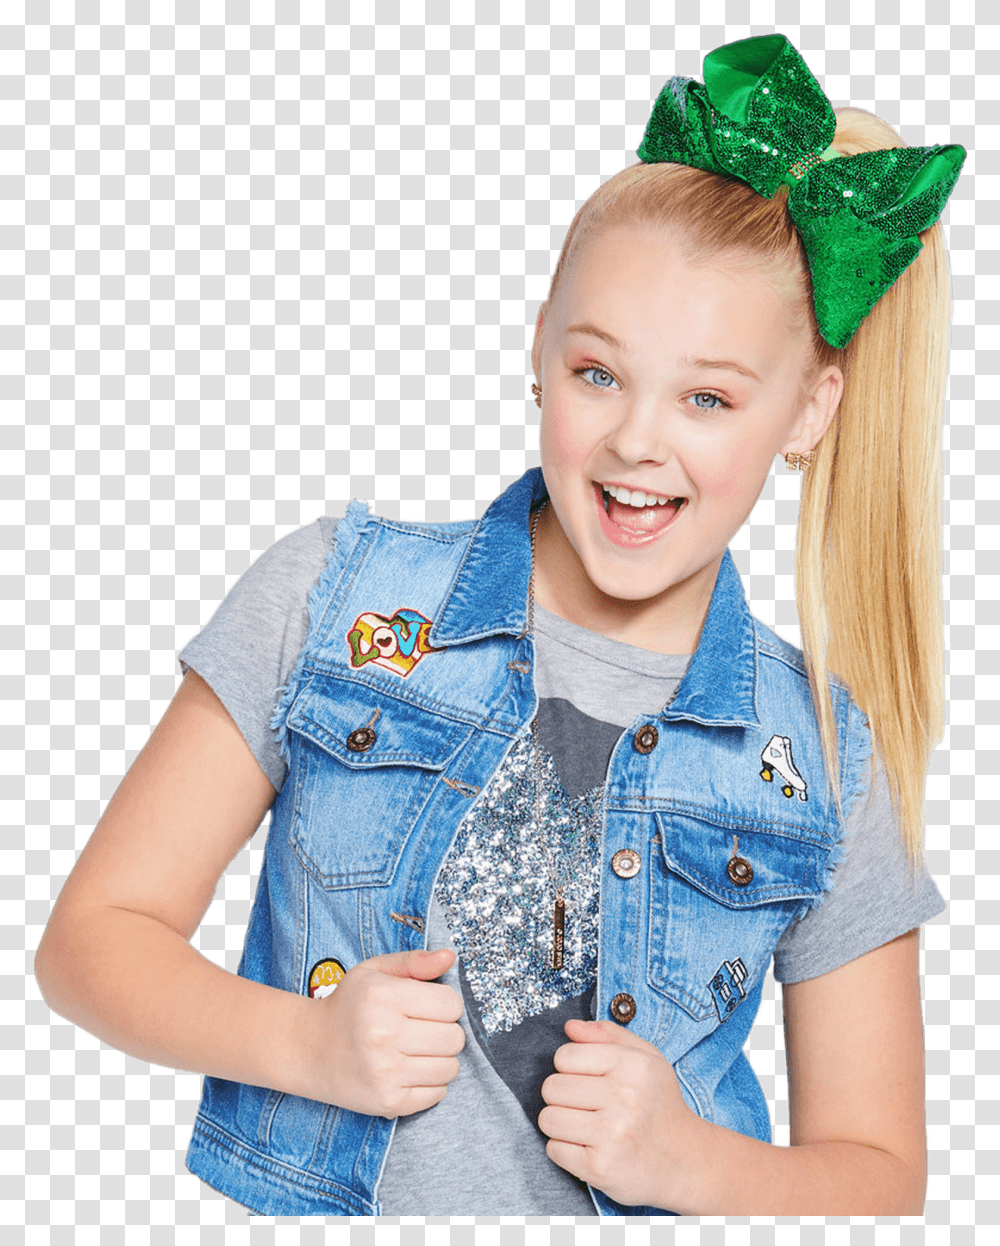 Jojo Siwa With Green Bow In Hair Jojo Siwa, Pants, Jeans, Person Transparent Png